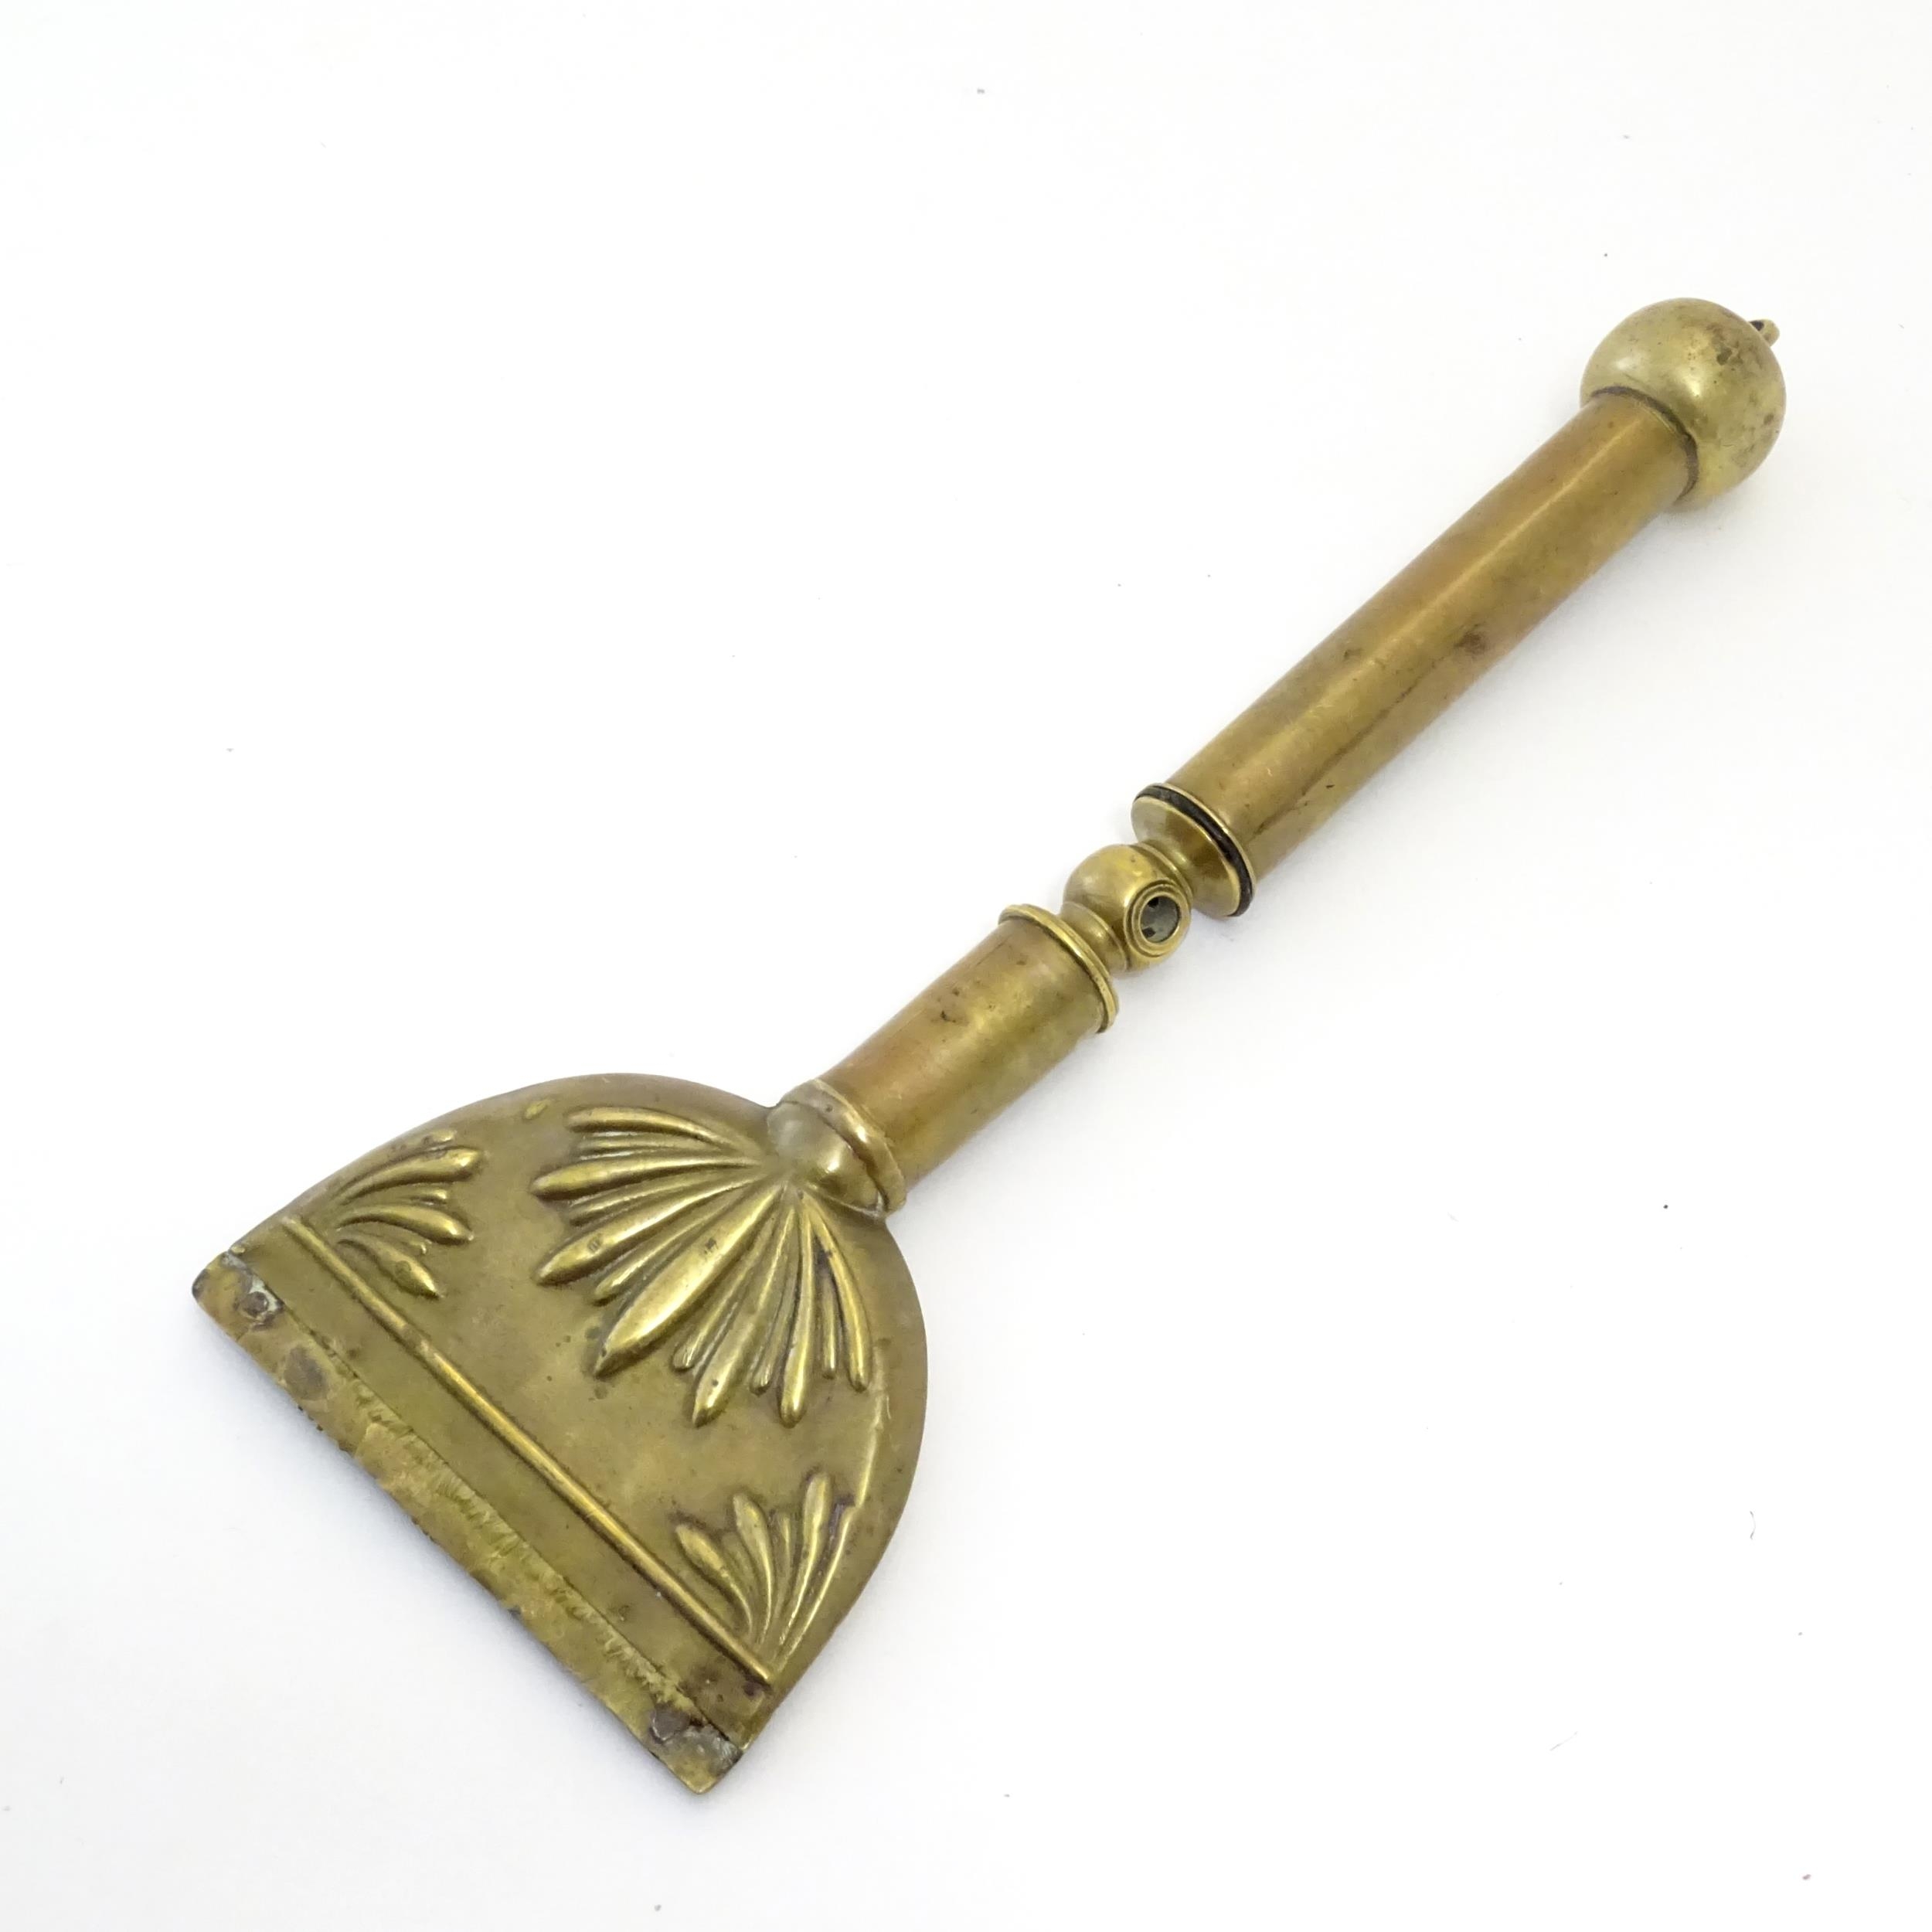 A 19thC brass horse hair singer / singeing lamp with embossed shell detail. Approx. 13 3/4" long - Image 4 of 6